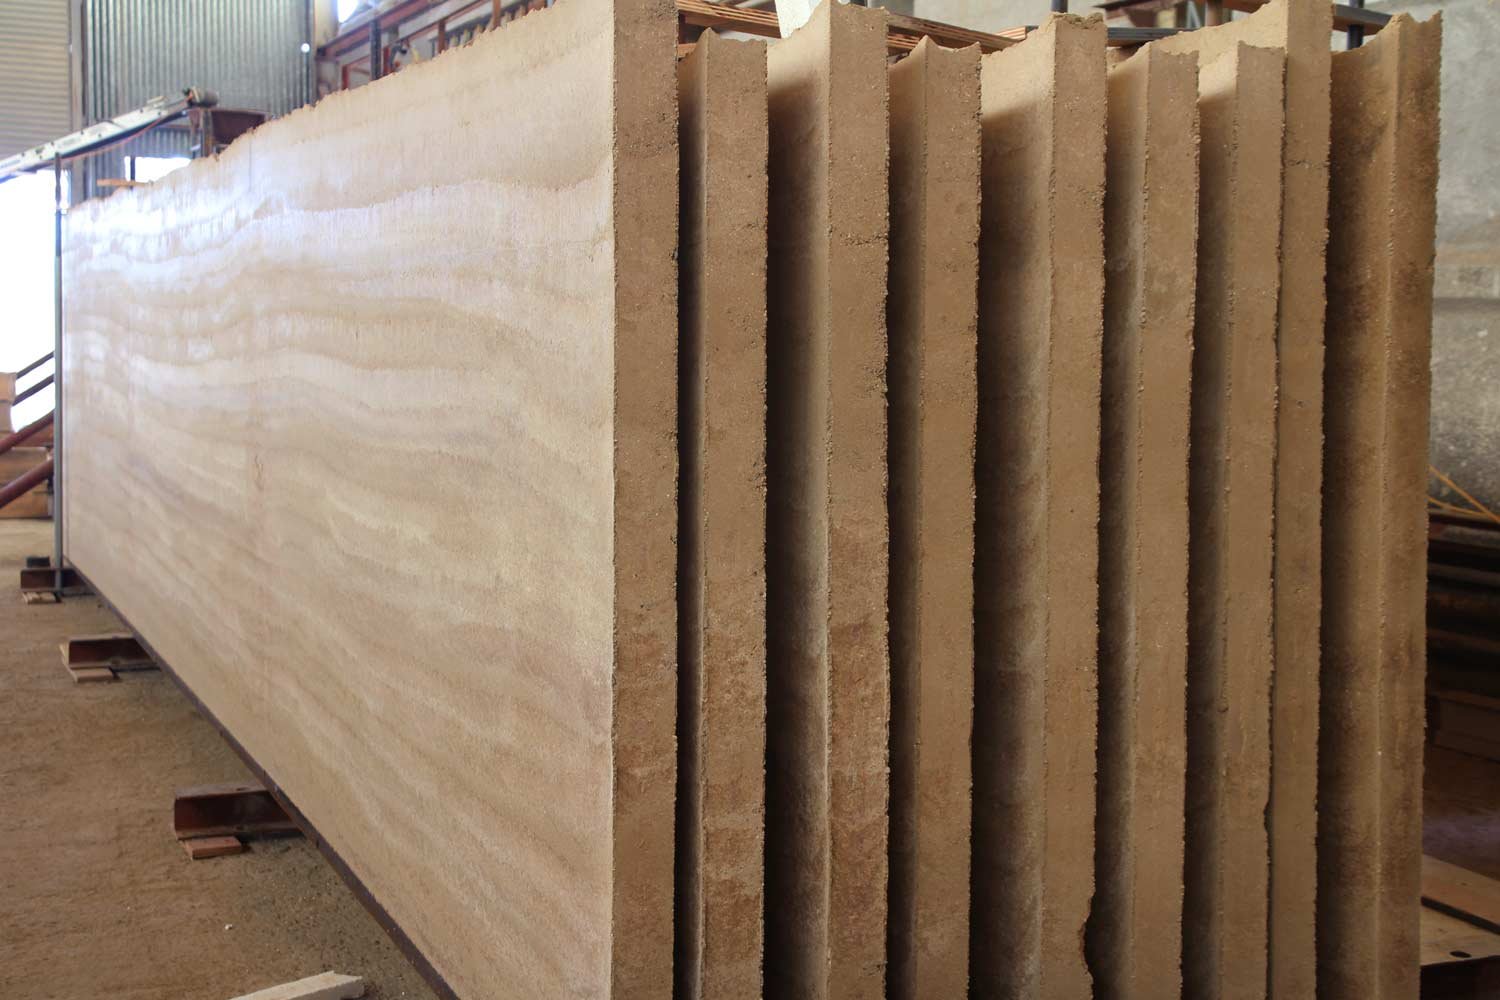 Earth Works - Manufacturing Rammed Panels